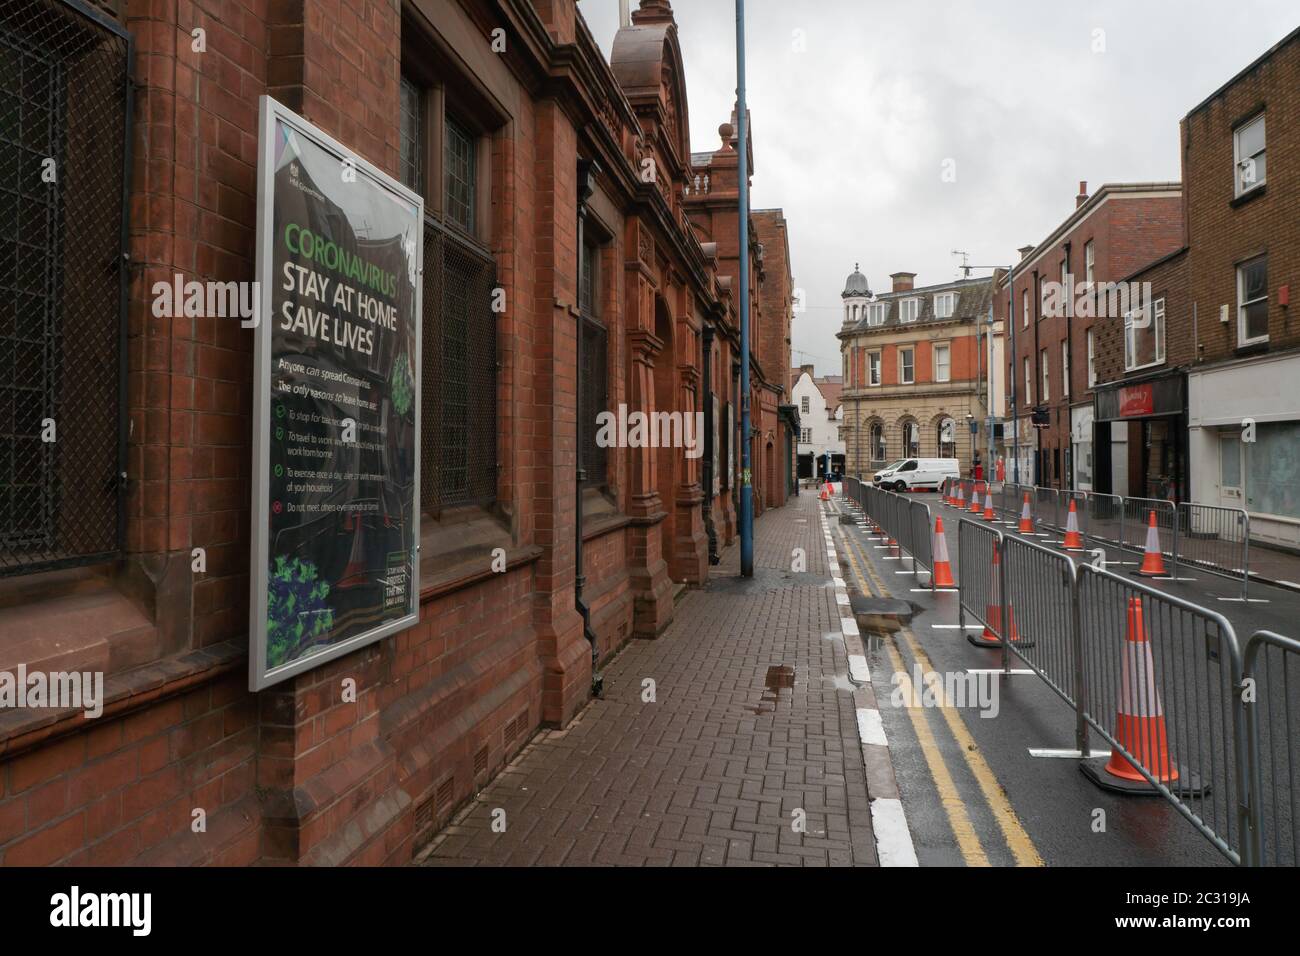 Stay at home sign and pedestrianisation in Market Street, Stourbridge. June 18th 2020. Covid-19 Pandemic. West Midlands. UK Stock Photo